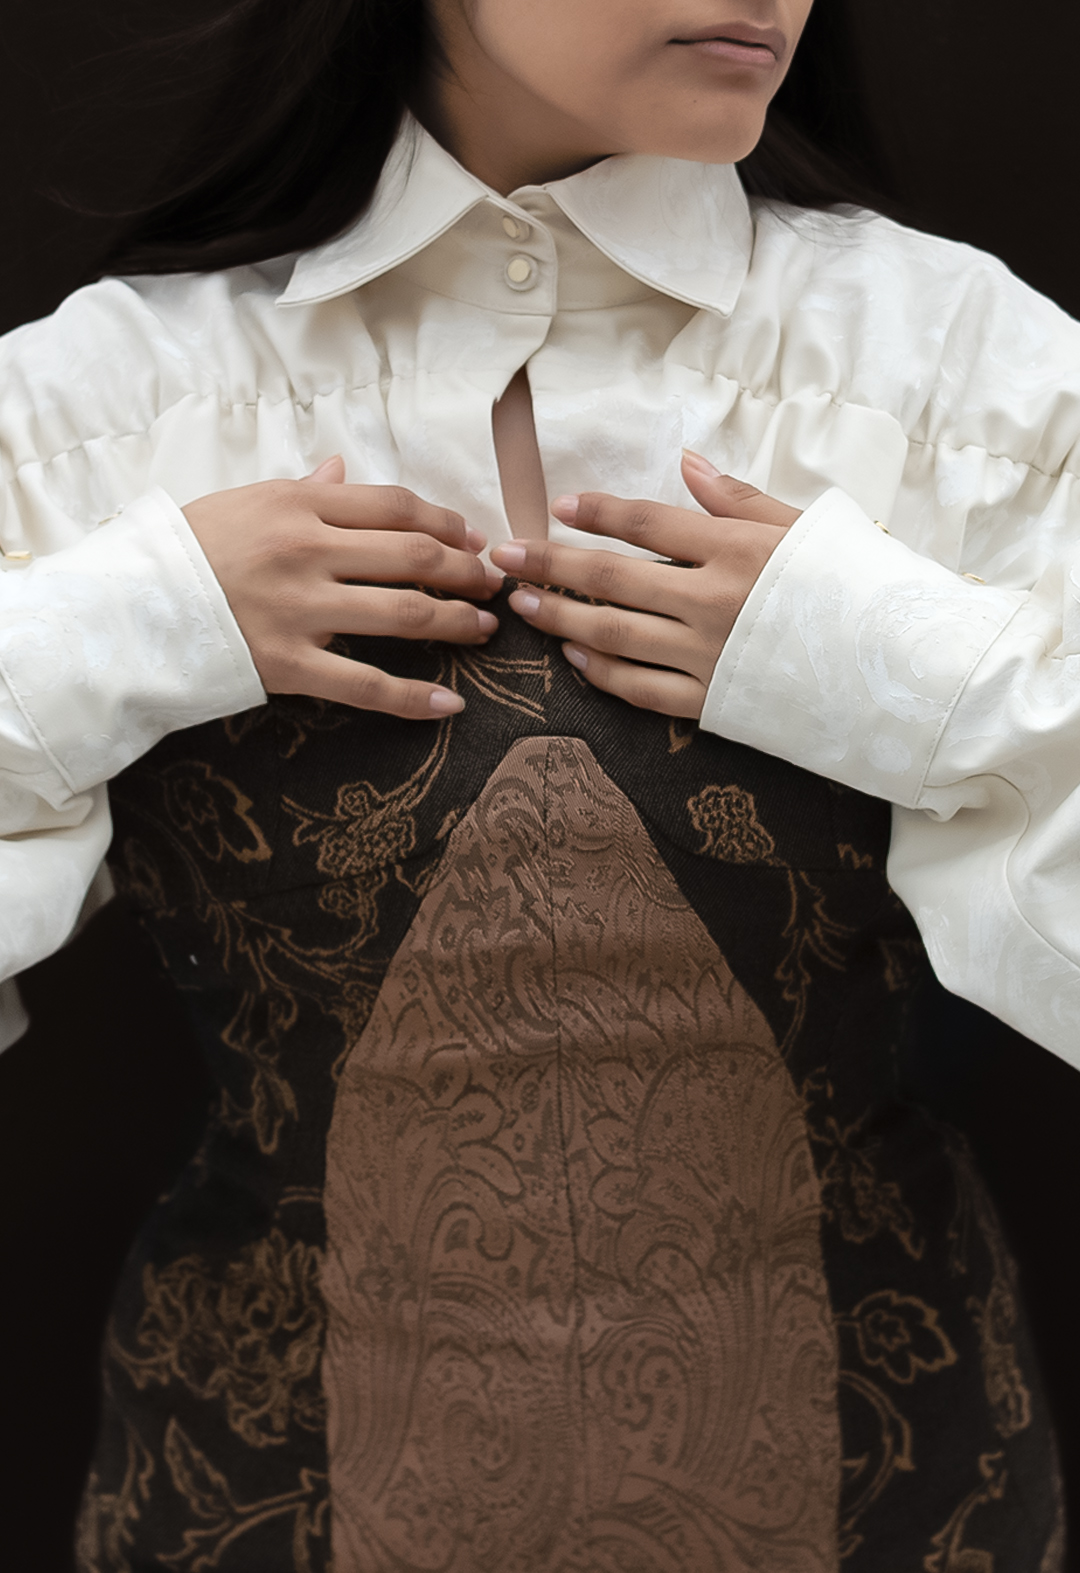 The photo shows a detail view of a ruched collared shirt, which was woodblock carved and printed by hand.